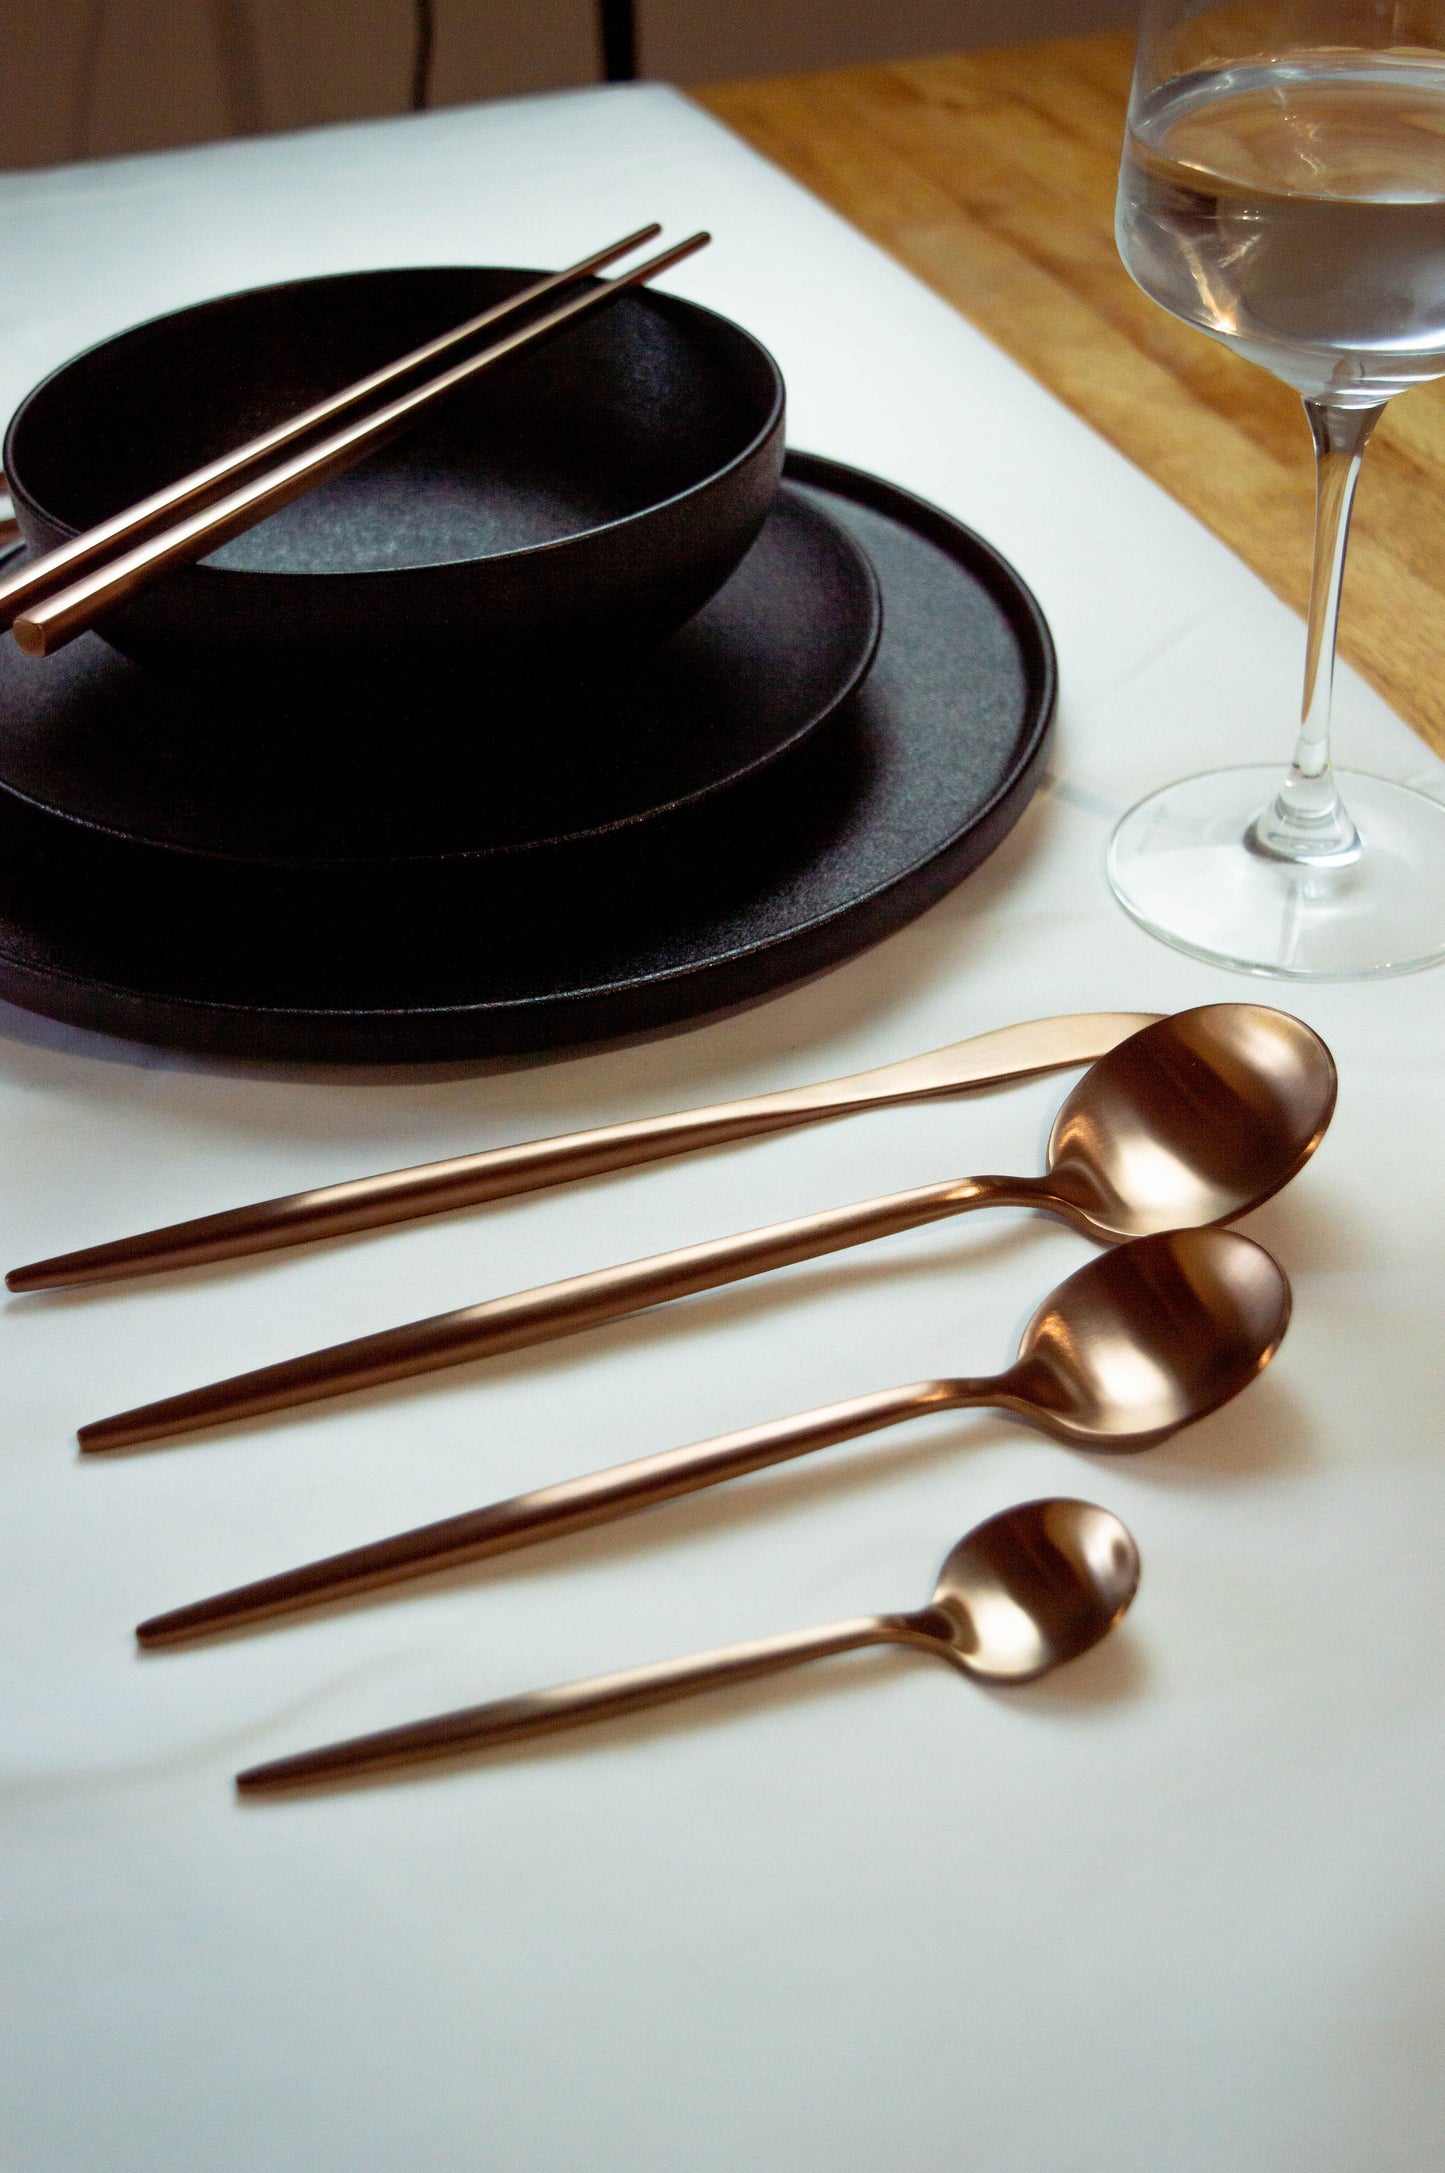 Fathers day Gift ideas mothers day presents birthday valentines labour day Christmas thanksgiving xmas silverware set for 8 chopsticks kitchen utensils set utinsil sets copper brown bronze chopsticks chopstik chop sticks cubiertos de acero juego cubiertos de acero inoxidable japanese kitchen accessories home essentials for new apartment eating tenedores japanese bronze dinnerware set modern silverware set stainless steel 